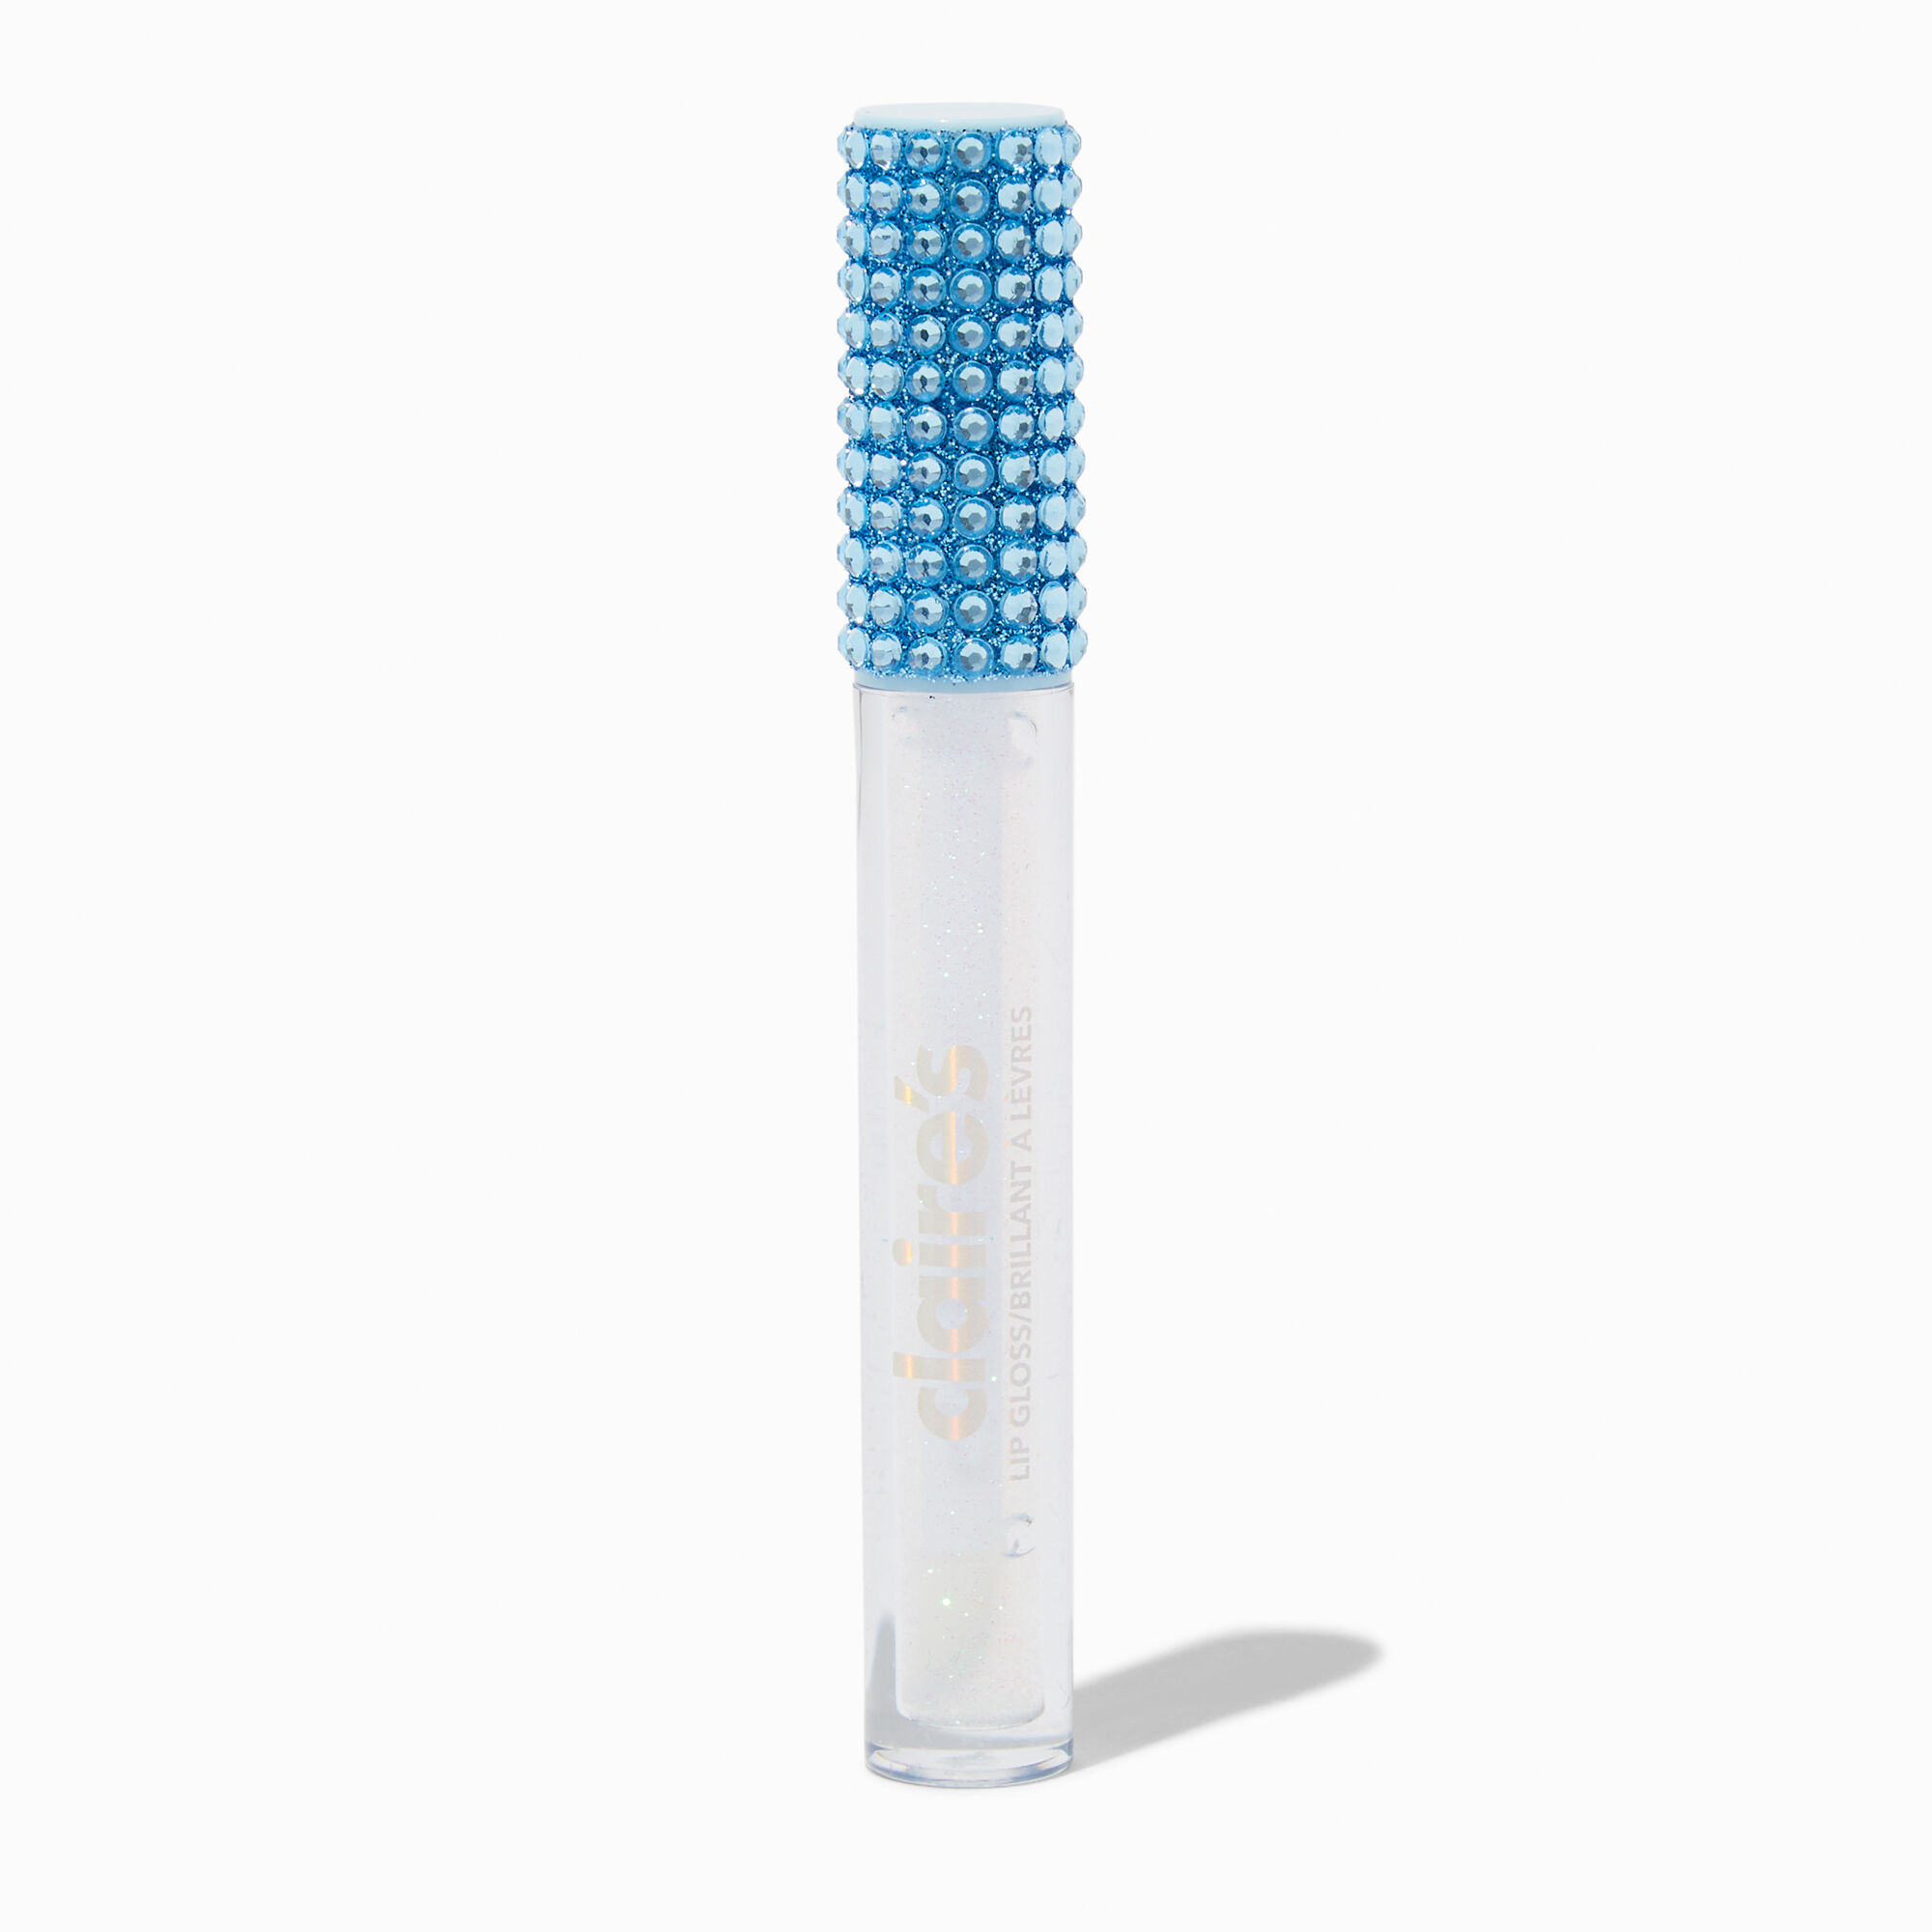 View Claires Bling Glitter Lip Gloss Wand Blue information